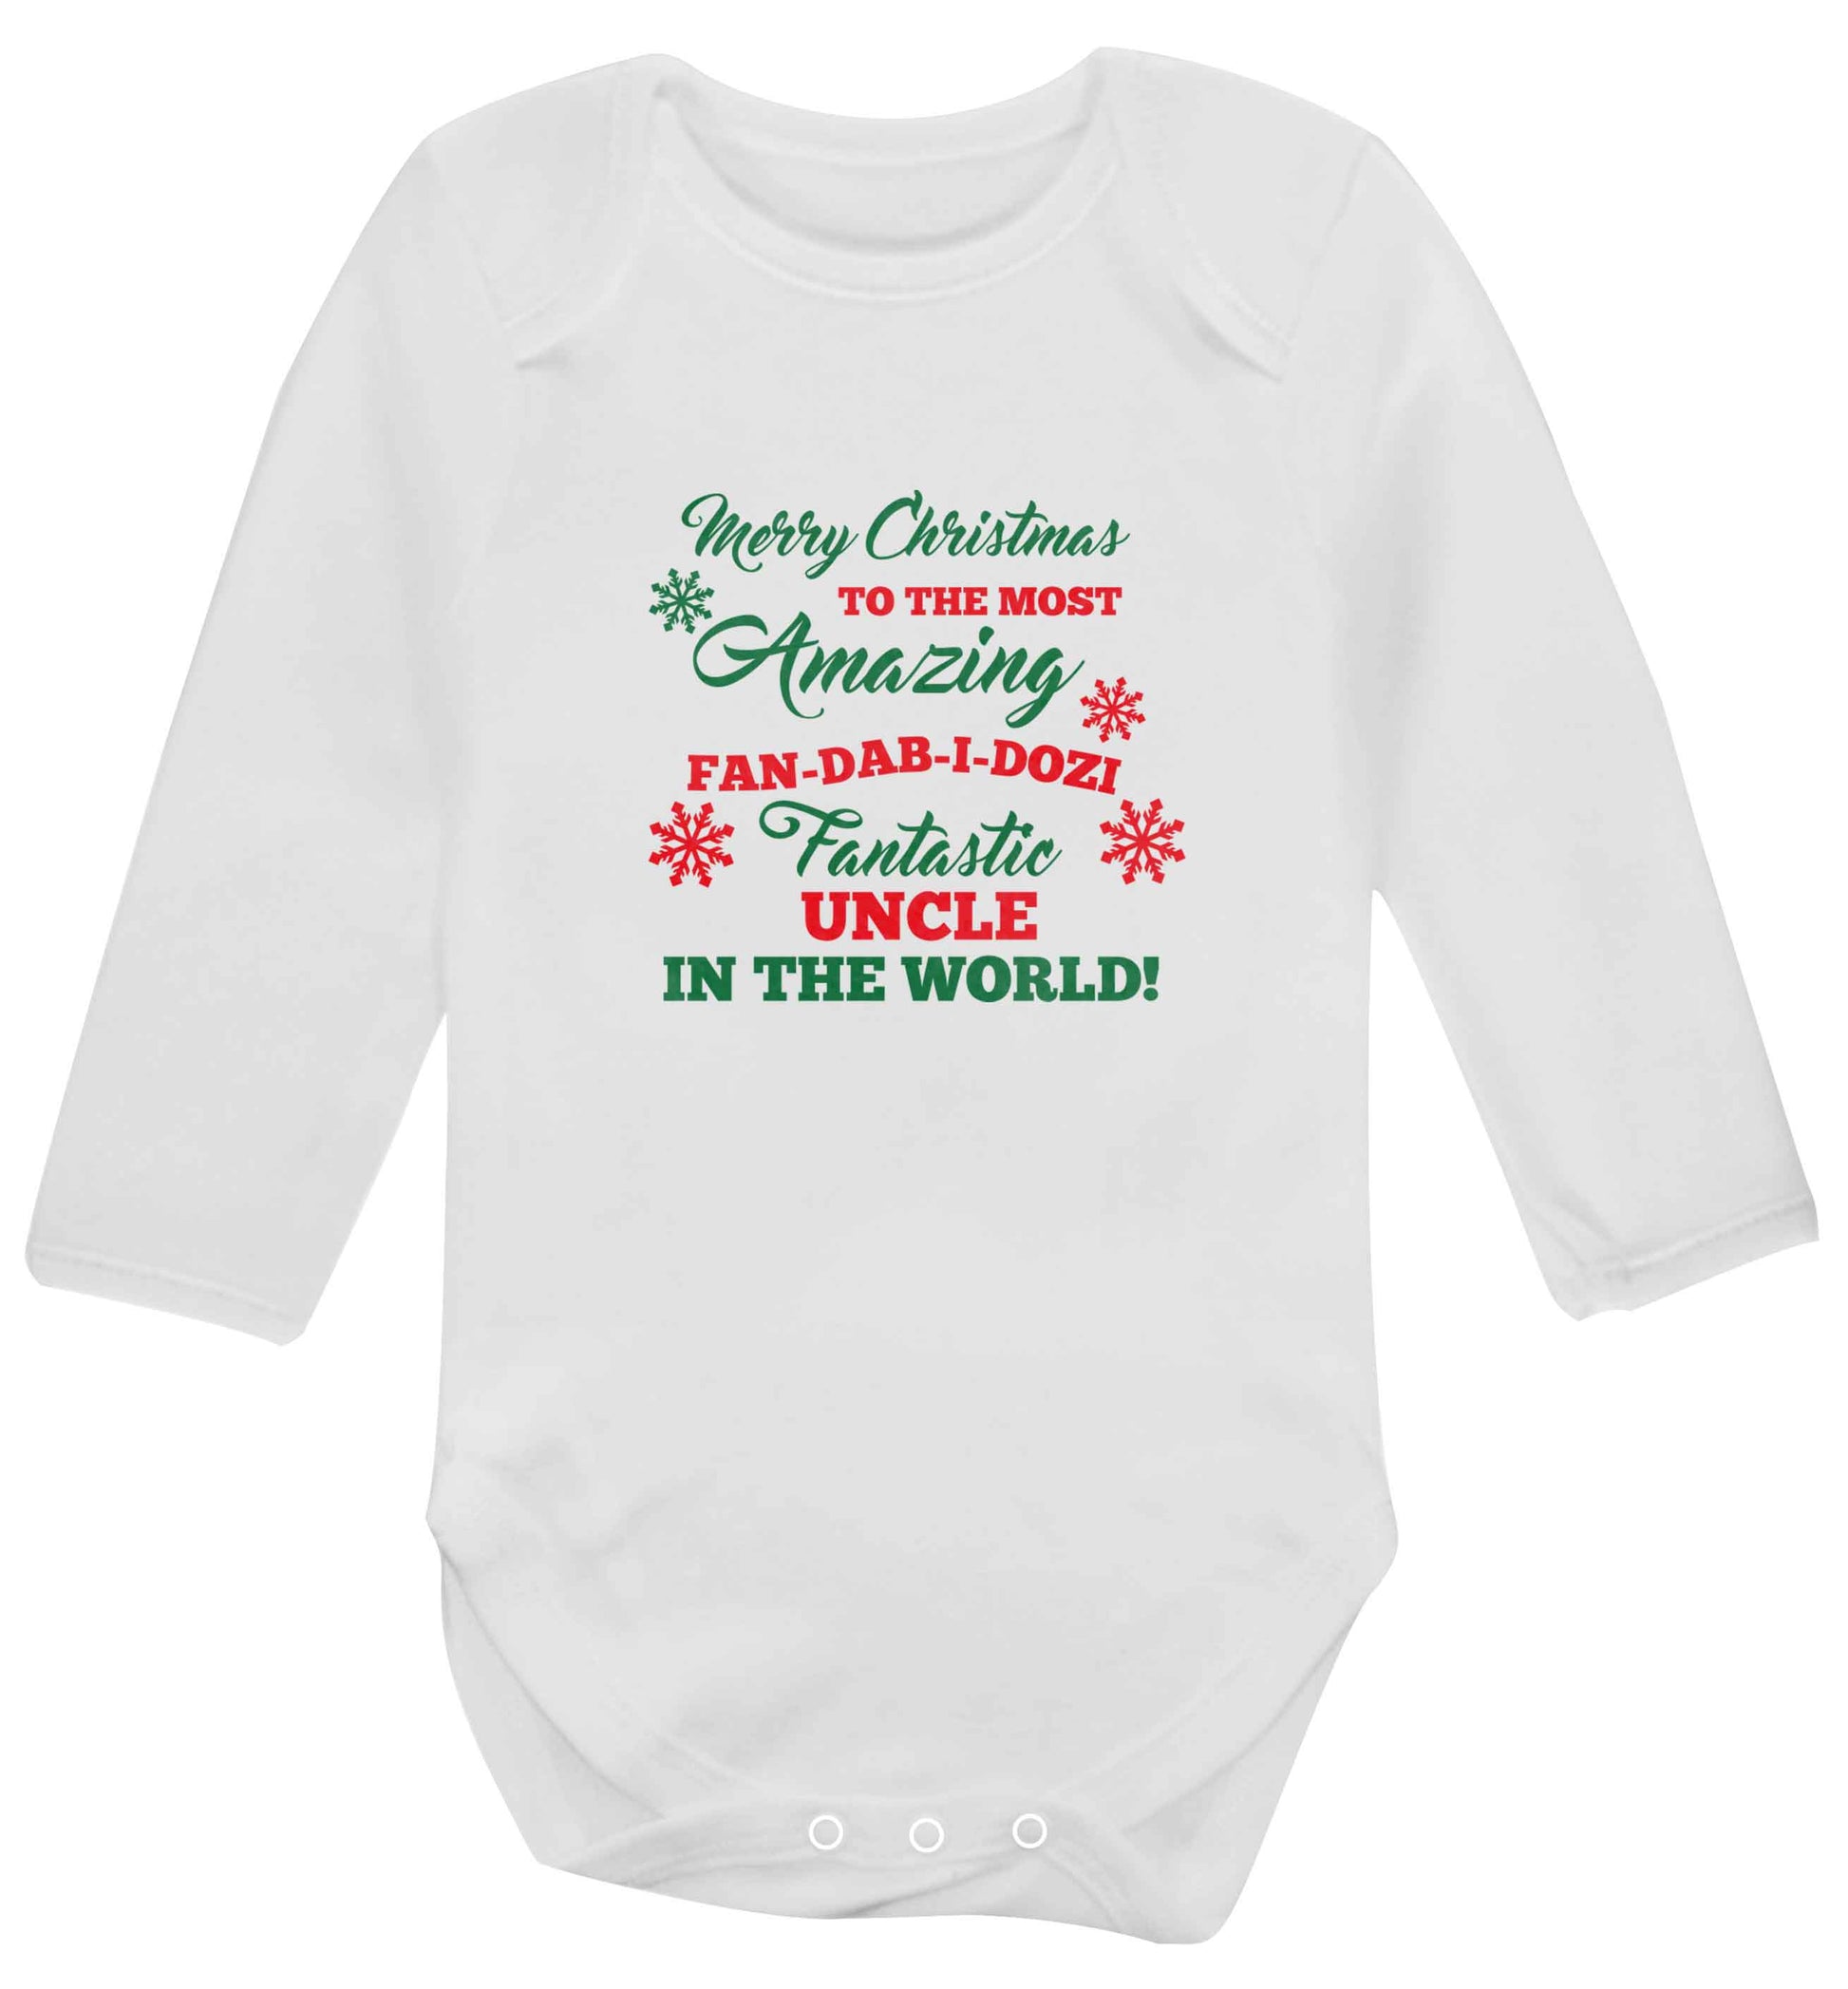 Merry Christmas to the most amazing fan-dab-i-dozi fantasic Uncle in the world baby vest long sleeved white 6-12 months